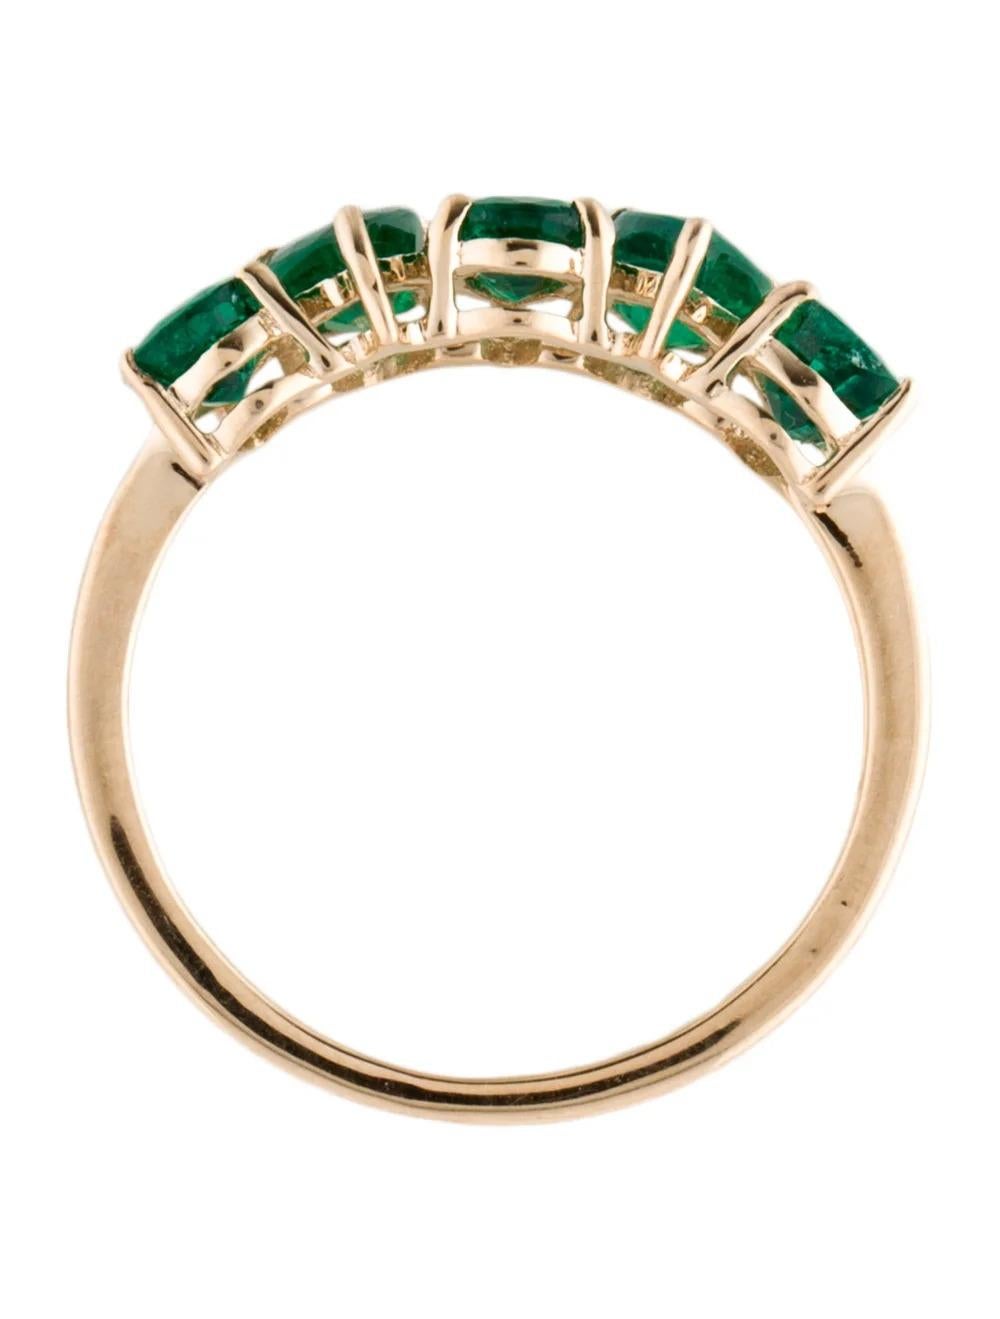 Women's 14K Yellow Gold 1.94ctw Emerald Band Ring, Size 7: Gemstone Statement Jewelry For Sale